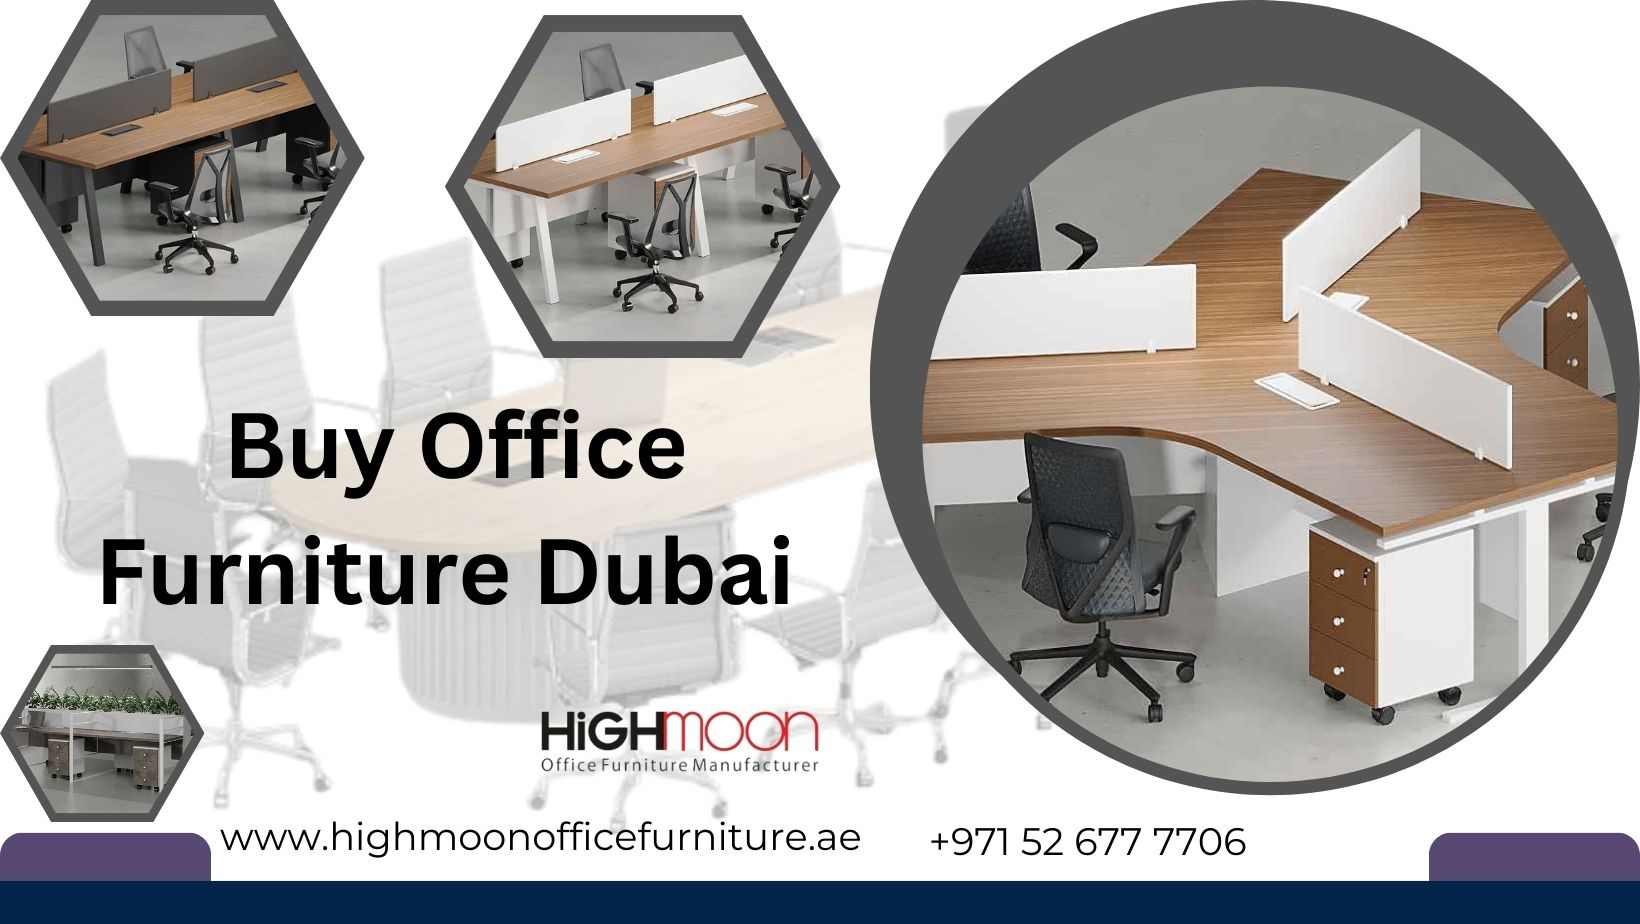 How to Buy Office Furniture Dubai Effectively & Under Budget